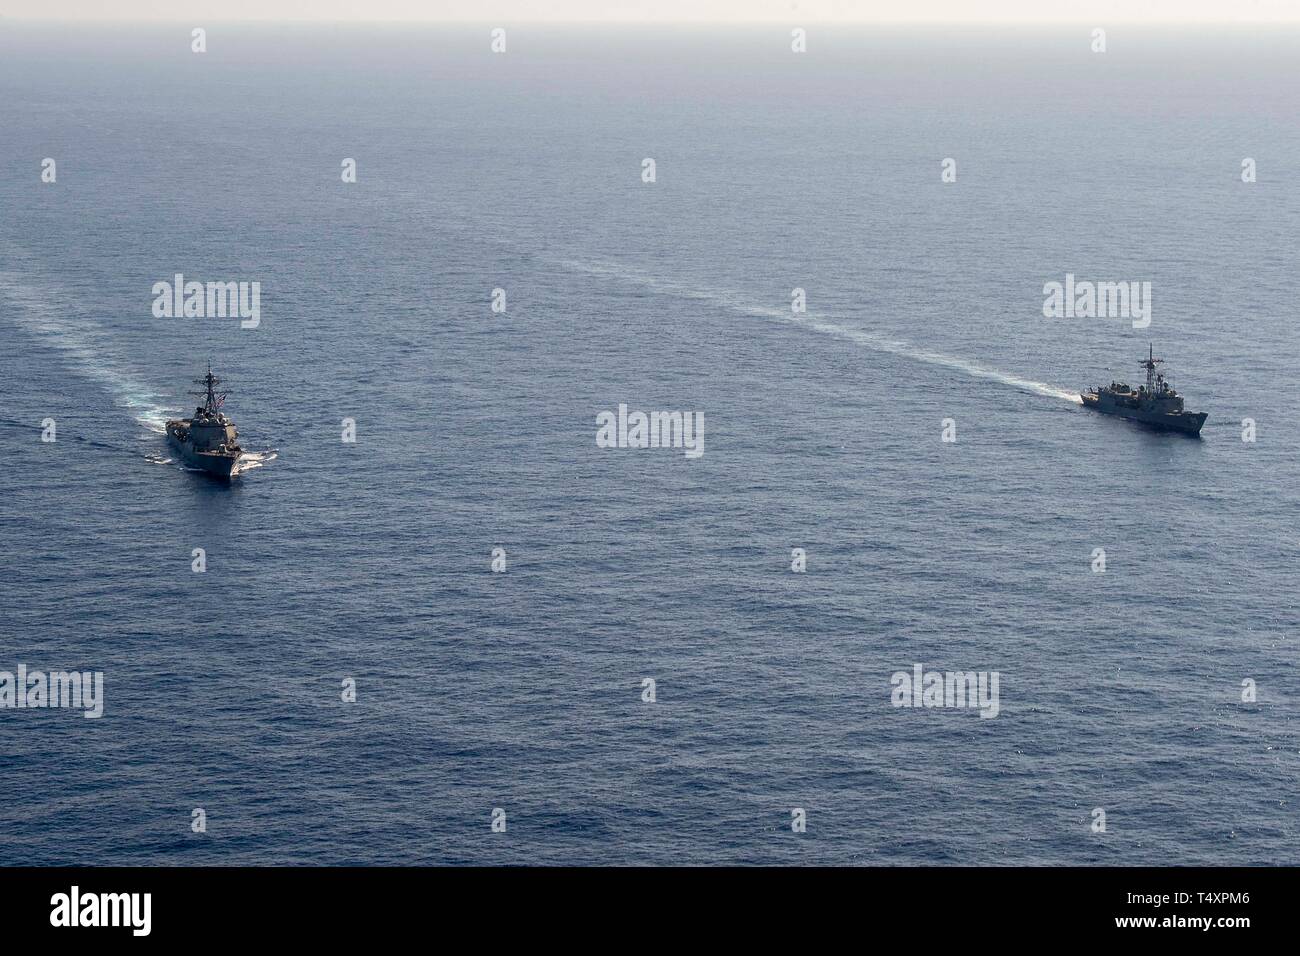 190418-N-UI104-0633    PHILIPPINE SEA (April 18, 2019) The Arleigh Burke-class guided-missile destroyer USS Preble (DDG 88) and the Royal Australian Navy Adelaide-class guided-missile frigate HMAS Melbourne (FFG 05) transit in formation during a cooperative deployment. Preble and Melbourne are participating in a cooperative deployment in order to improve on maritime capabilities between partners.  Preble is deployed to the U.S 7th Fleet area of operations in support of security and stability in the Indo-Pacific region. (U.S. Navy photo by Mass Communication Specialist 1st Class Bryan Niegel/Re Stock Photo